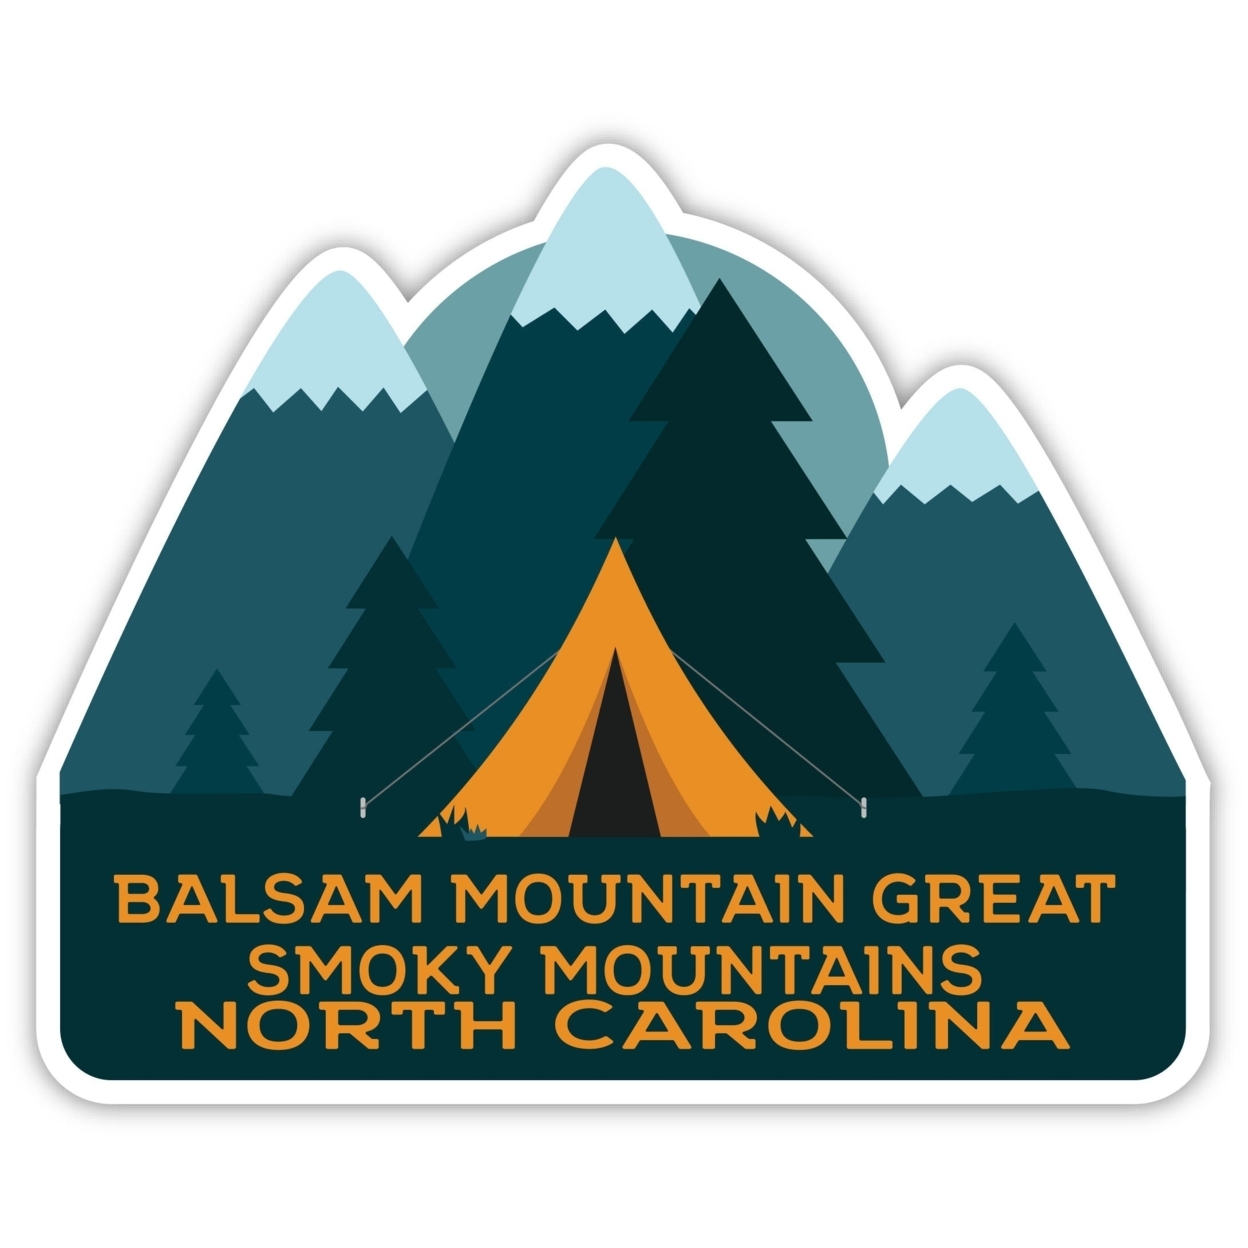 Balsam Mountain Great Smoky Mountains North Carolina Souvenir Decorative Stickers (Choose Theme And Size) - Single Unit, 2-Inch, Tent